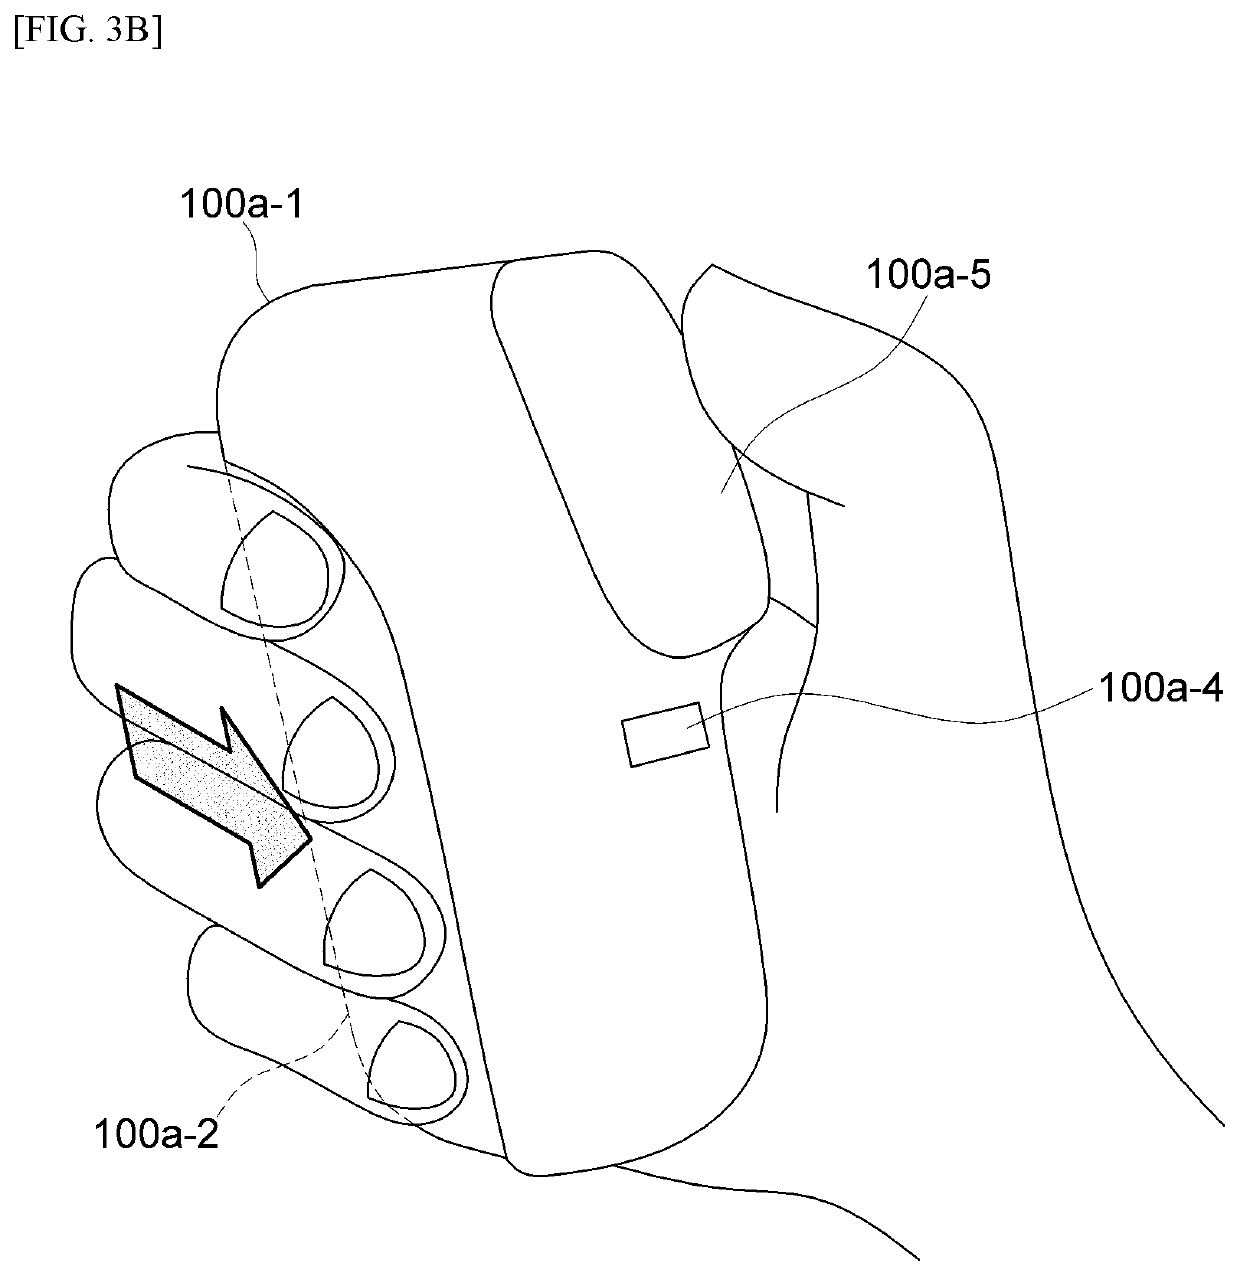 Pain-monitoring device and method